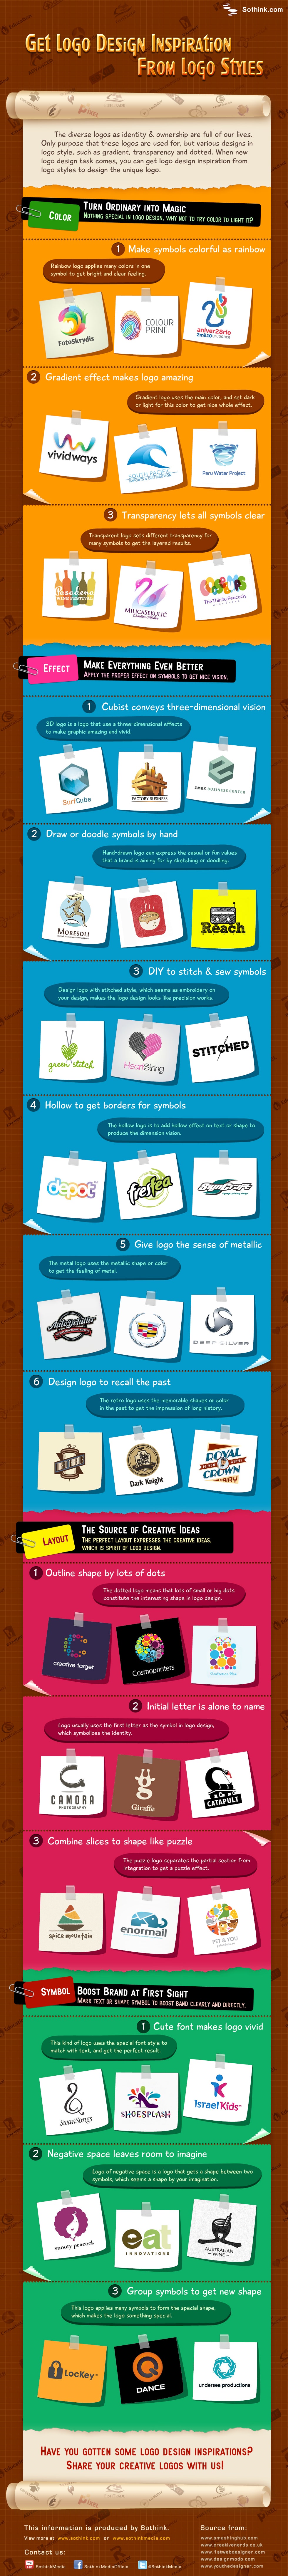 Logo Design: The 4 Types Of Inspiration [Infographic]